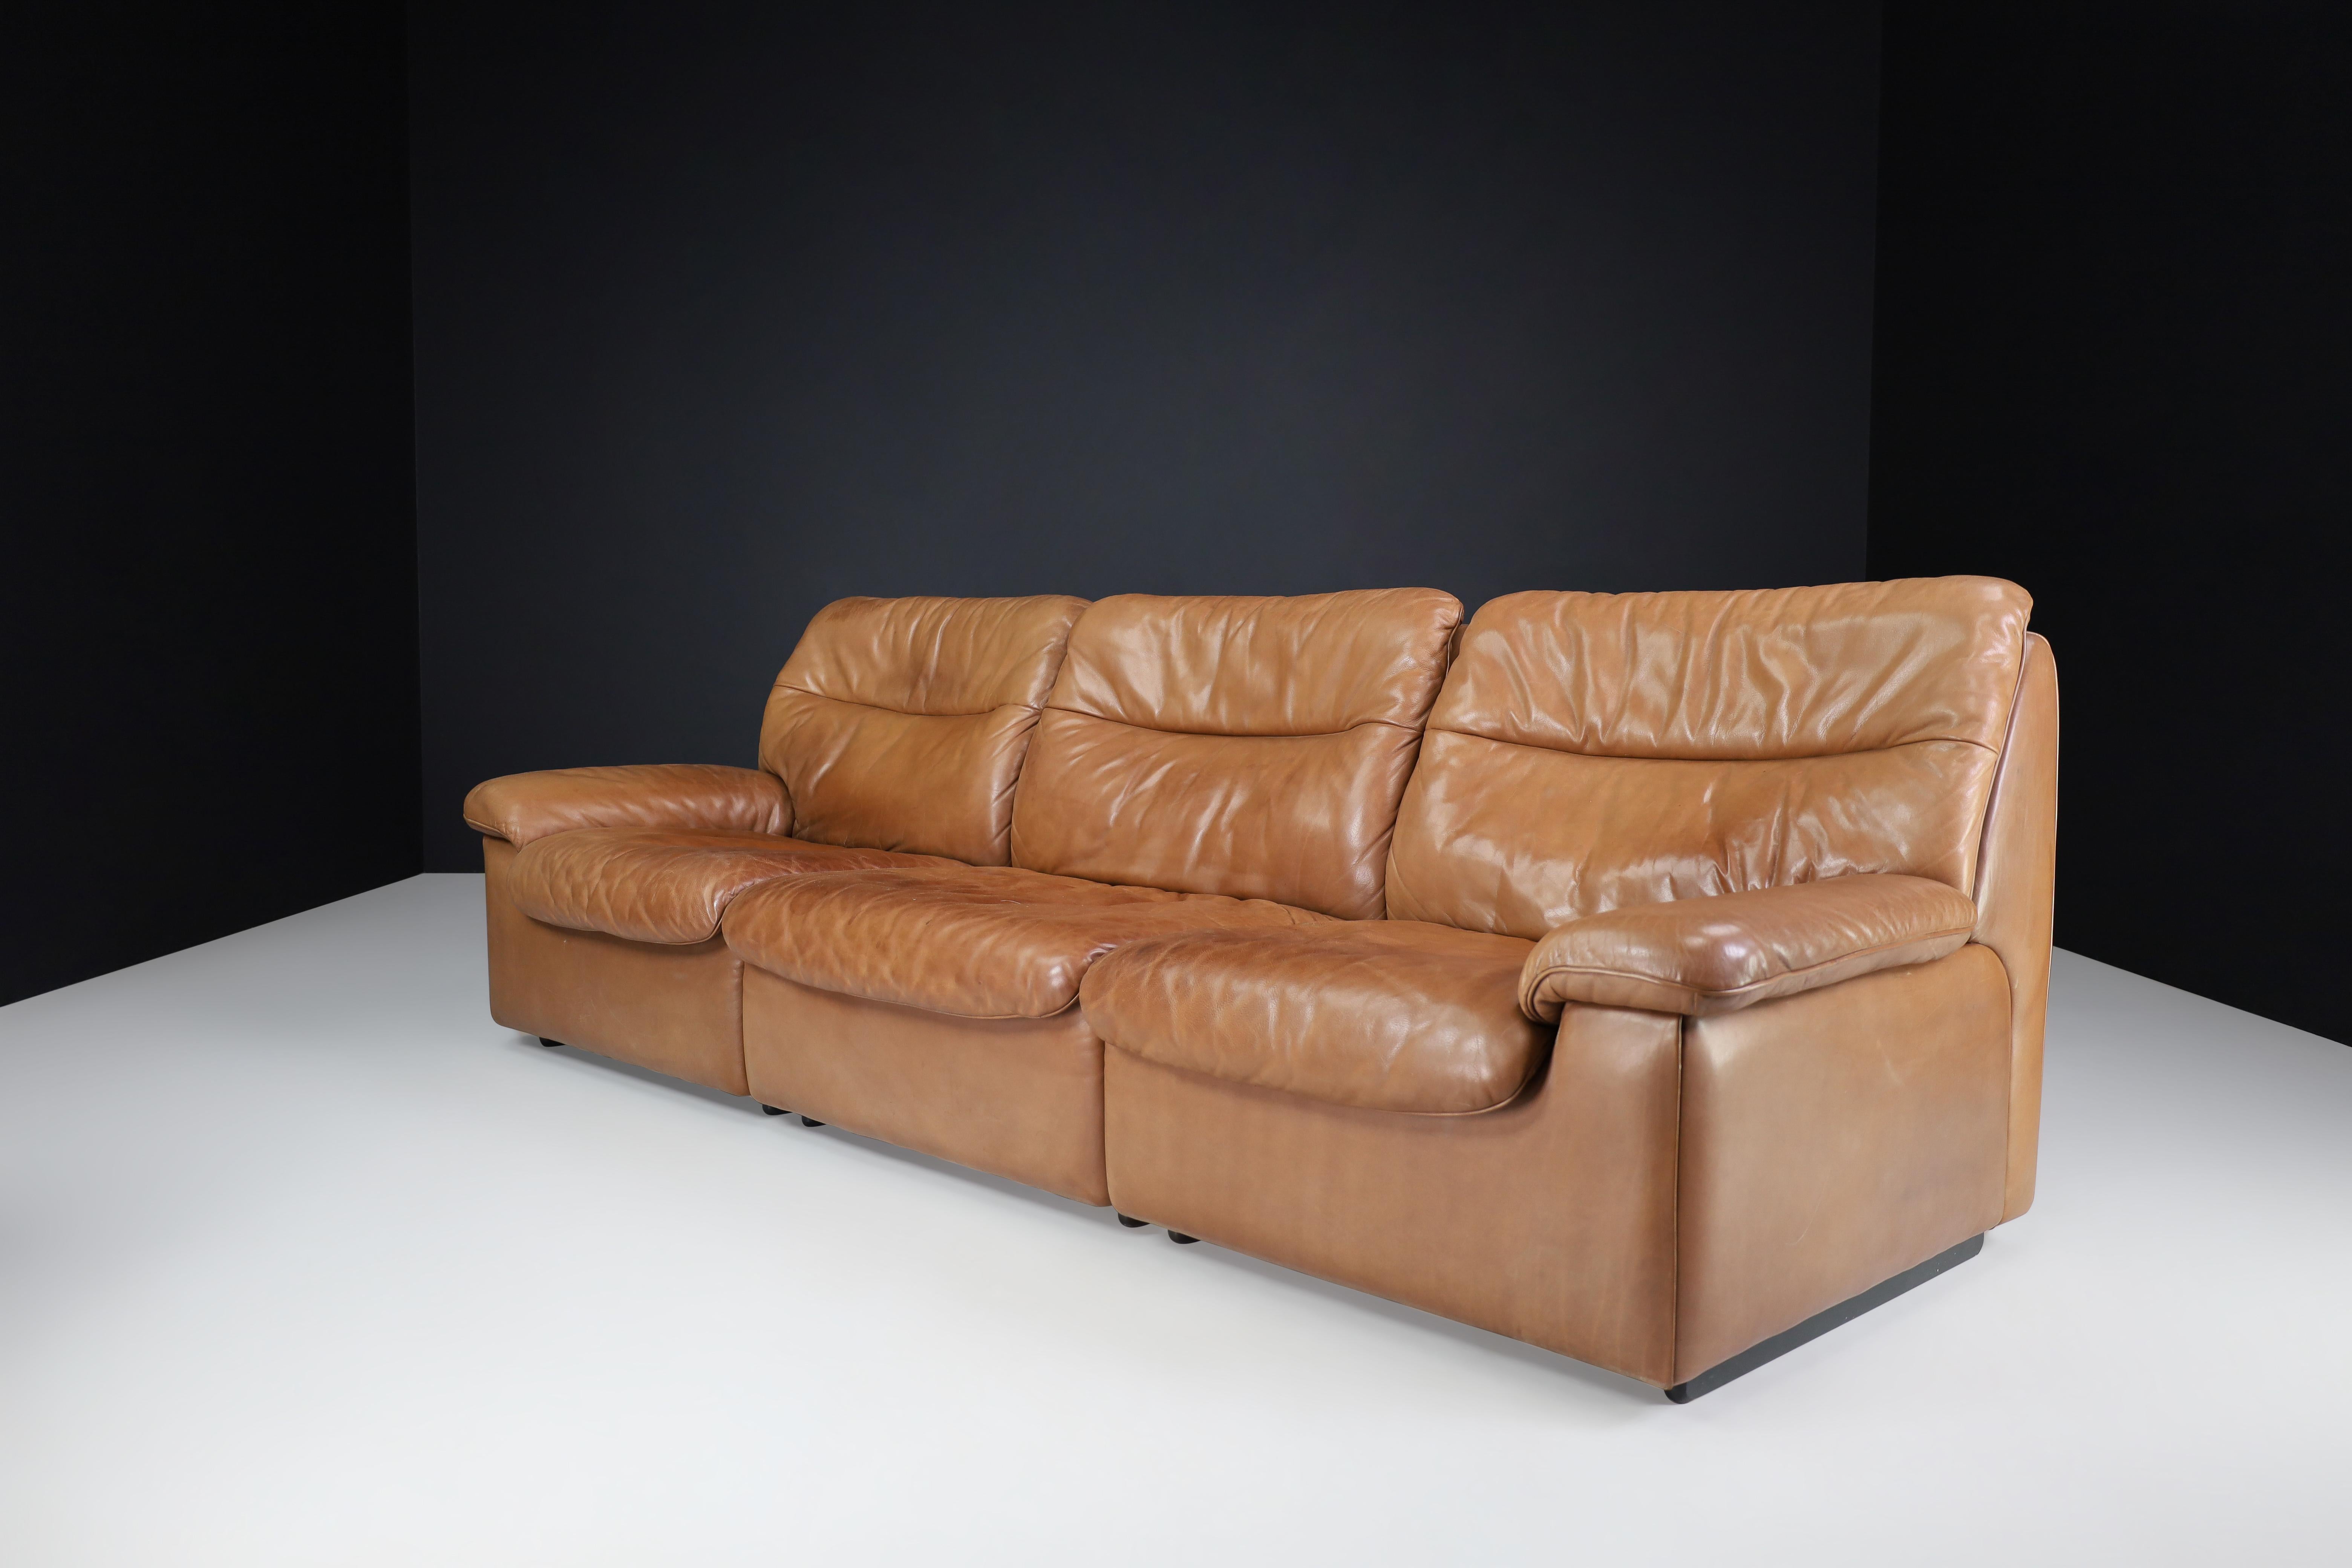 Mid-Century Modern De Sede Ds 63 Three-Seater Sofa in Patinated Leather, Switzerland, 1970s For Sale